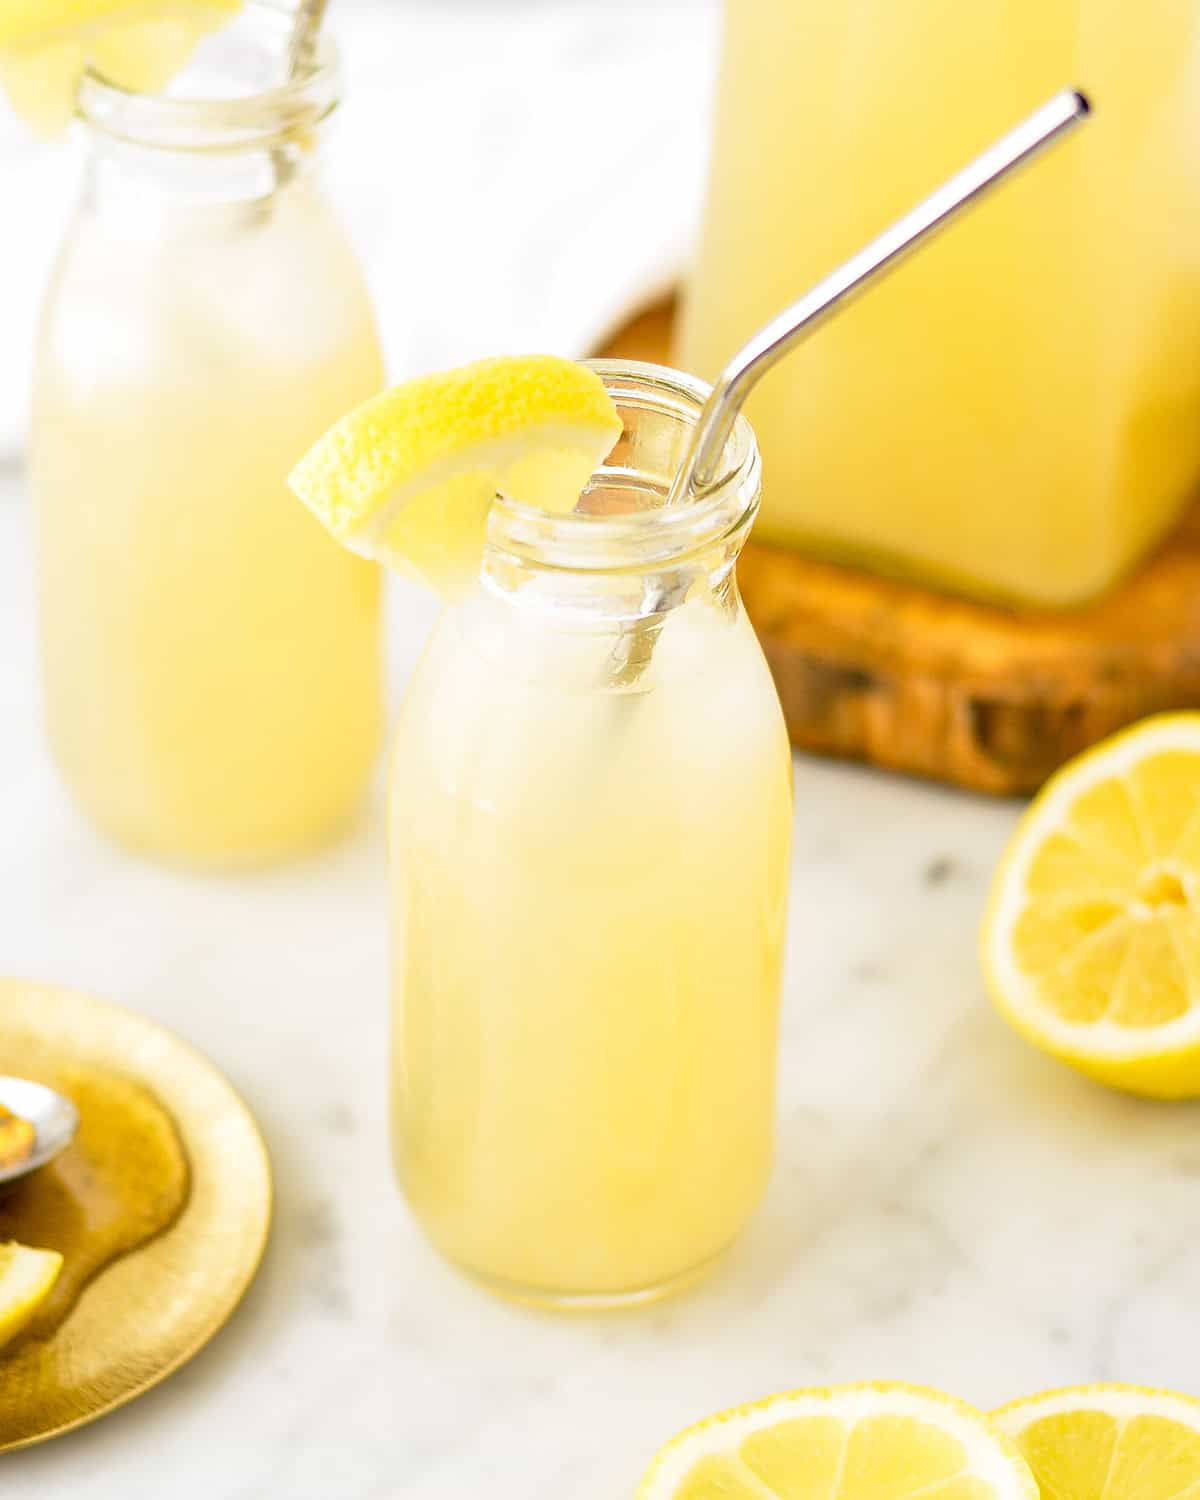 Orange Blossom Lemonade in a glass with a metal straw and a lemon wedge